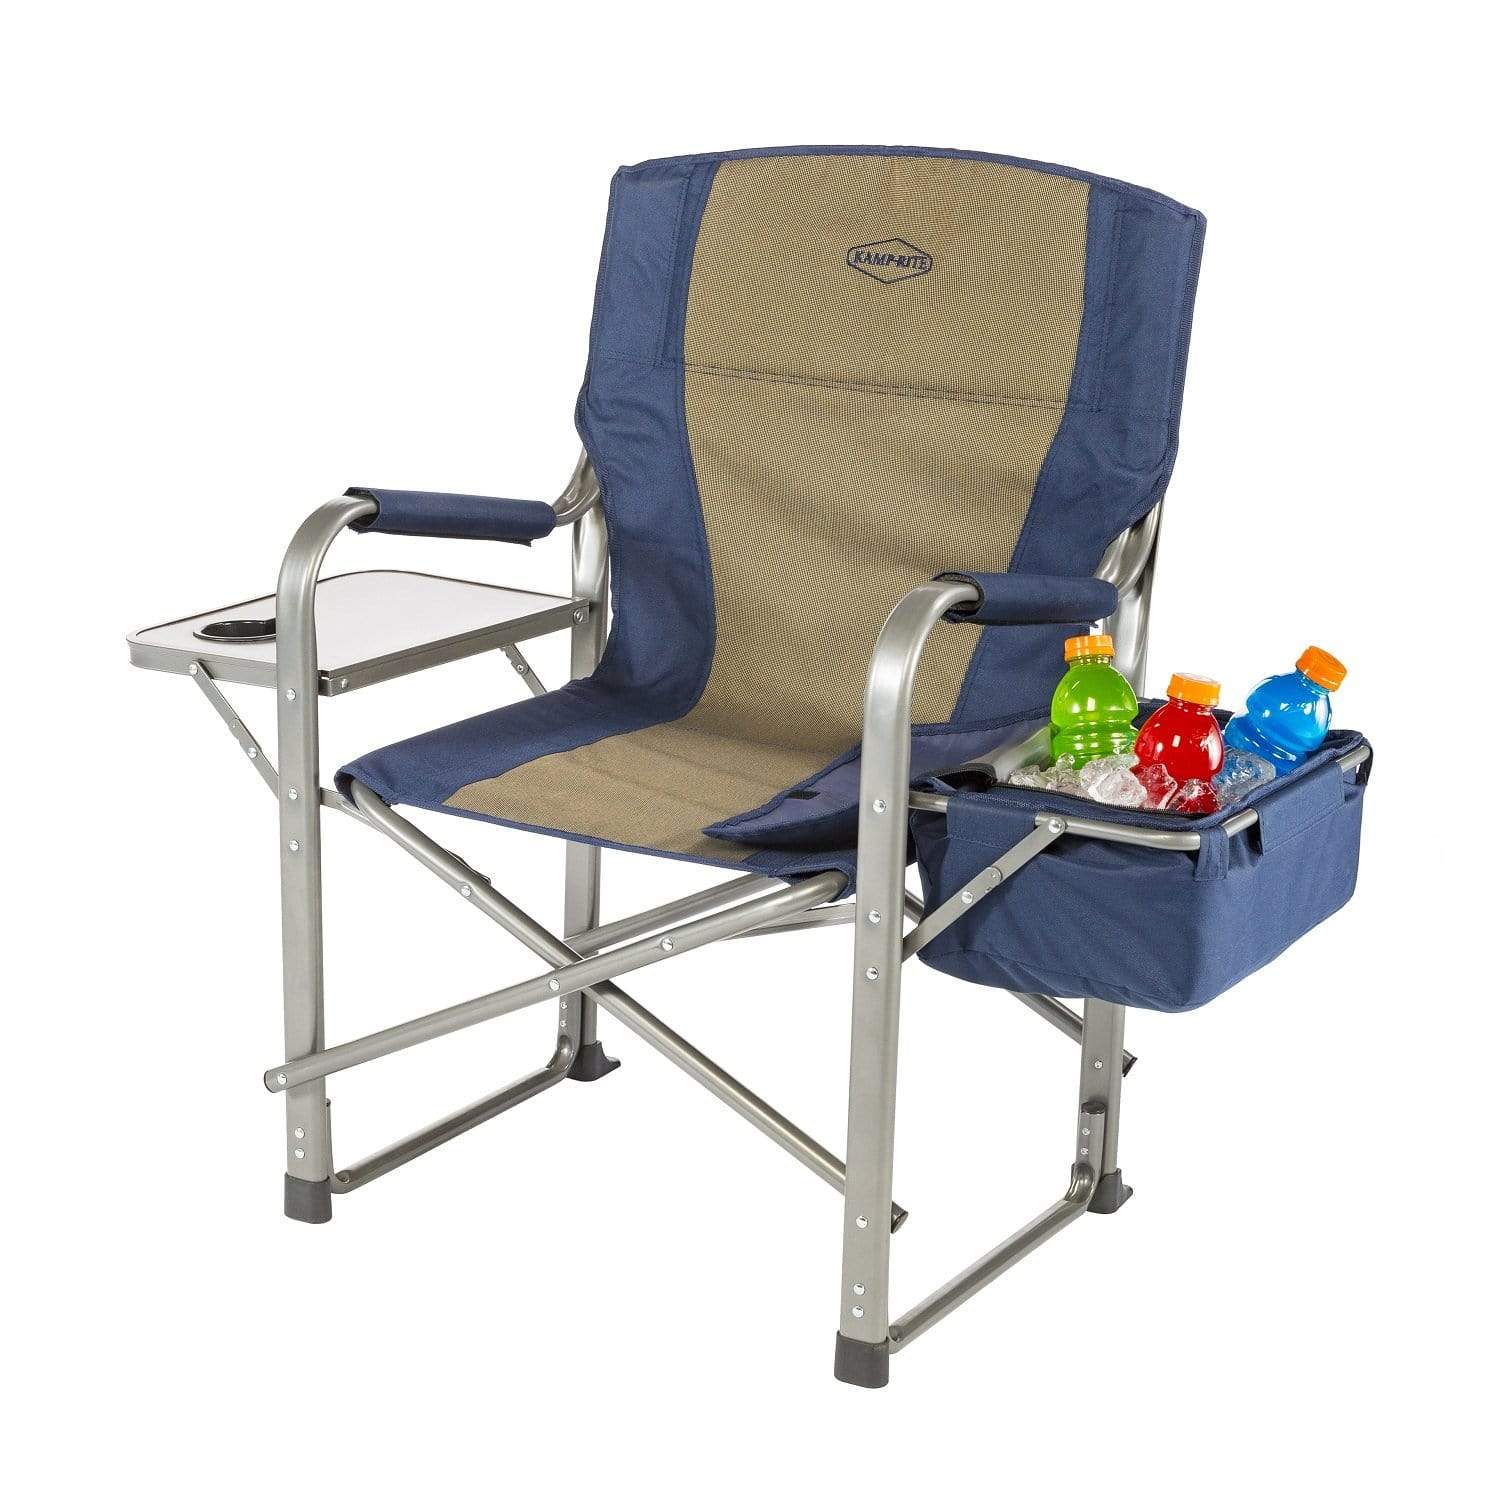 Kamp-Rite Camping & Outdoor : Furniture Kamp-Rite Directors Chair with Side Table and Cooler